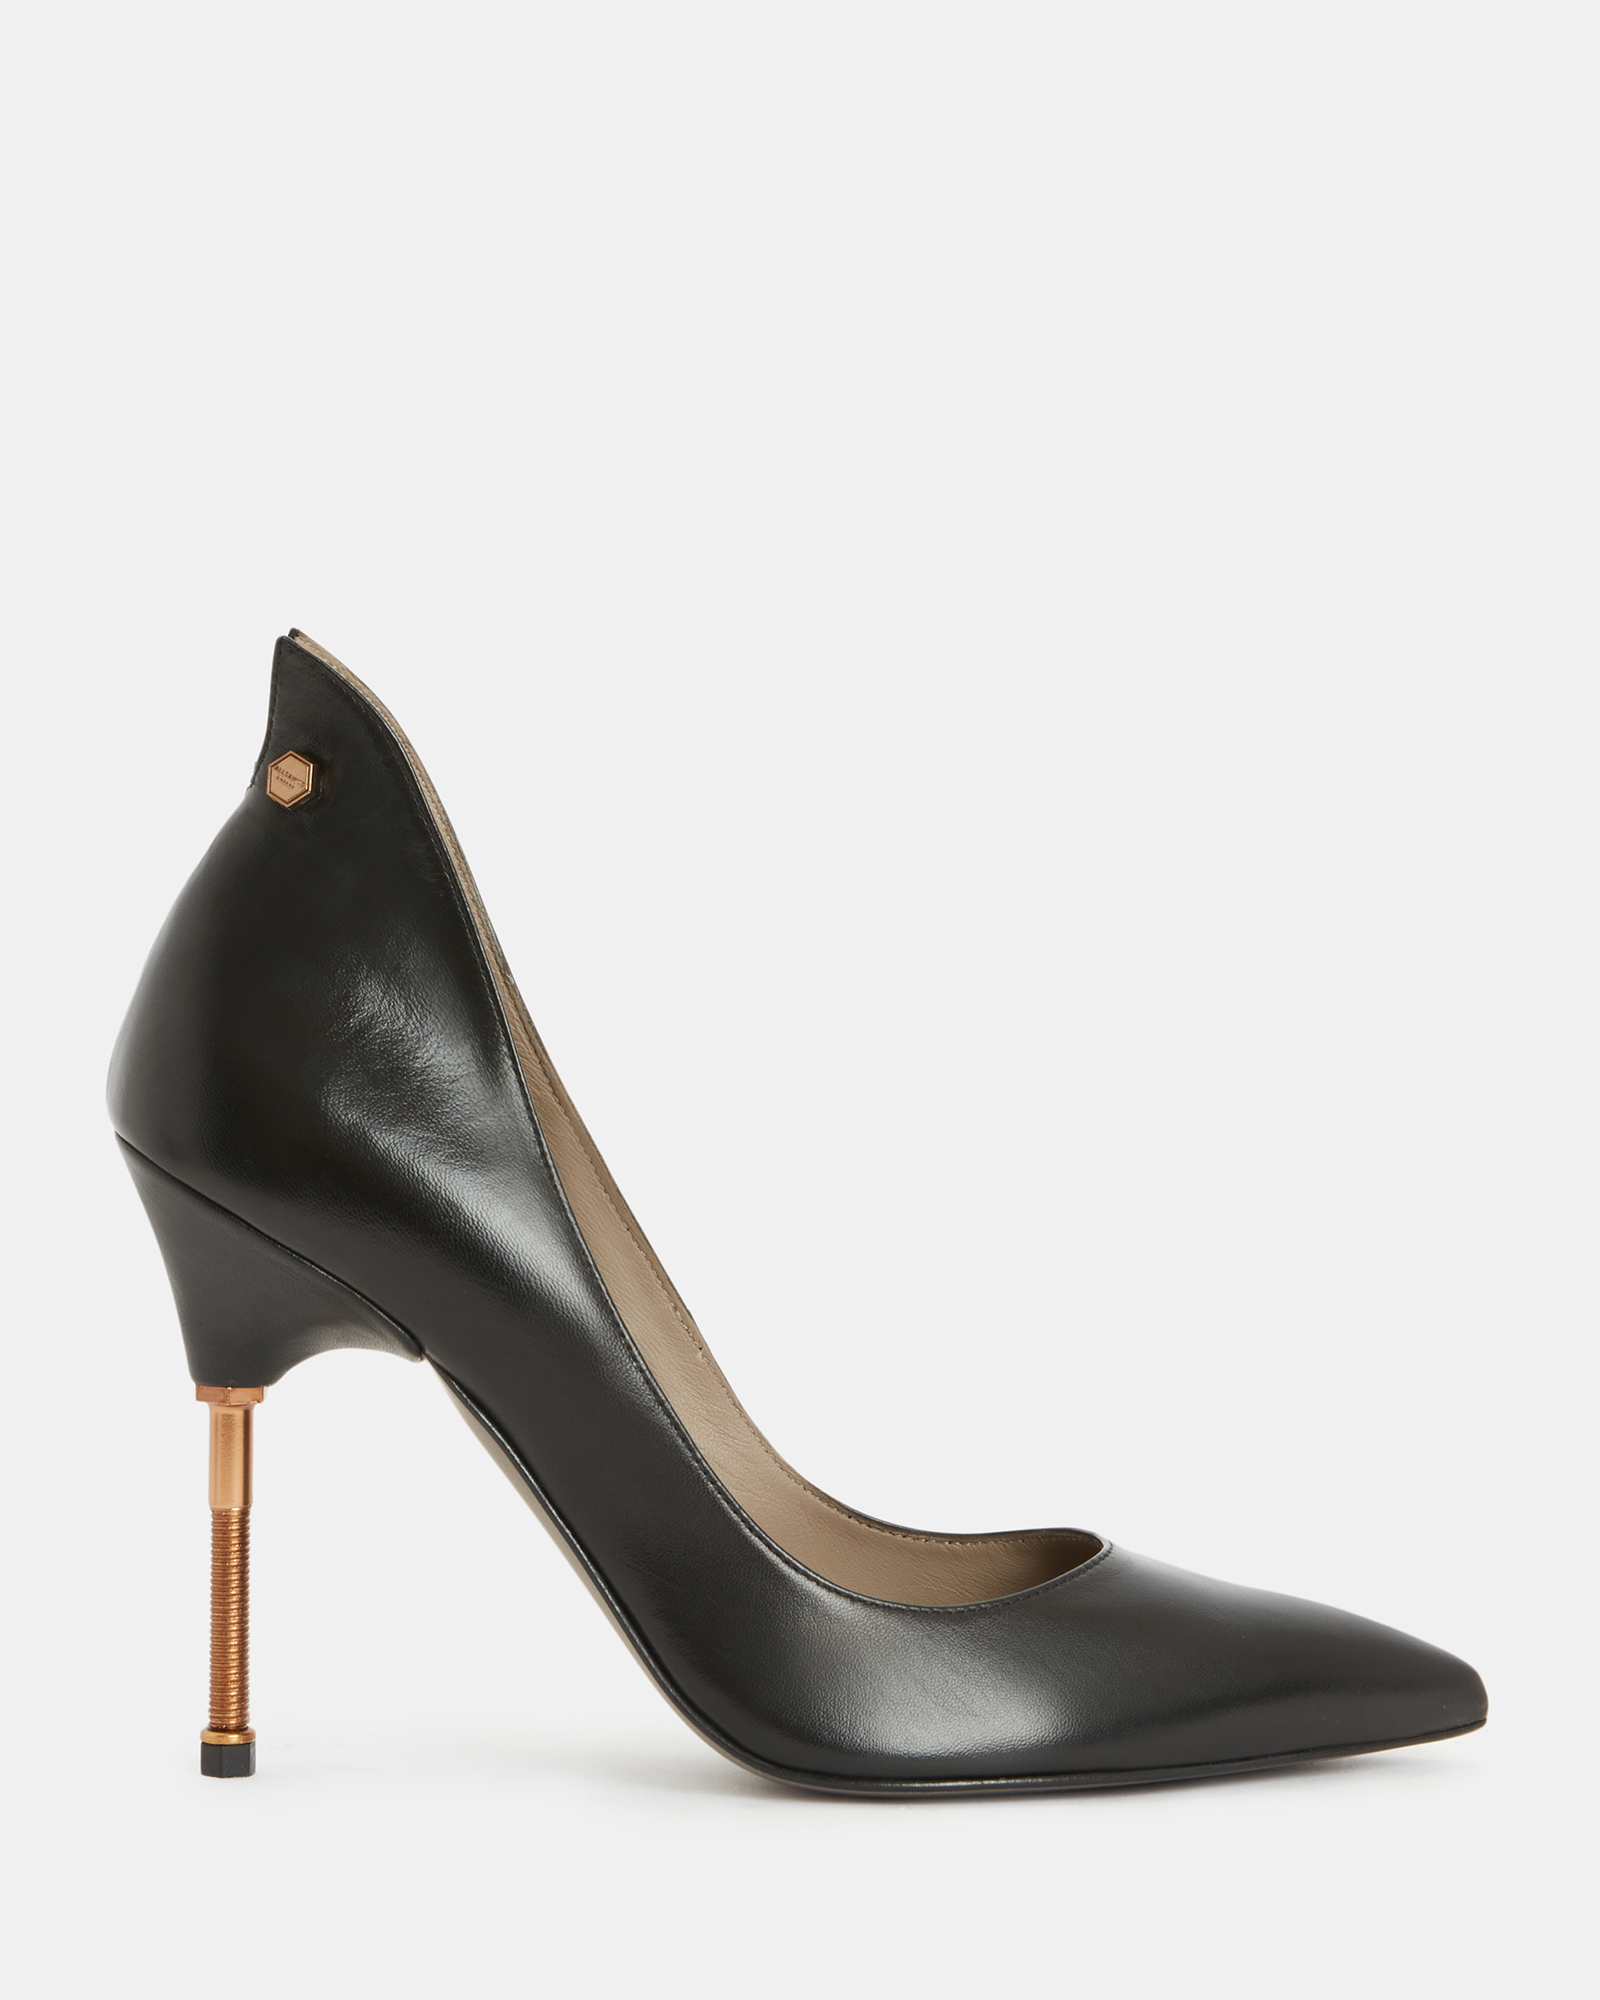 ALLSAINTS ALLSAINTS ROBIN POINTED LEATHER COURT HEELED SHOES